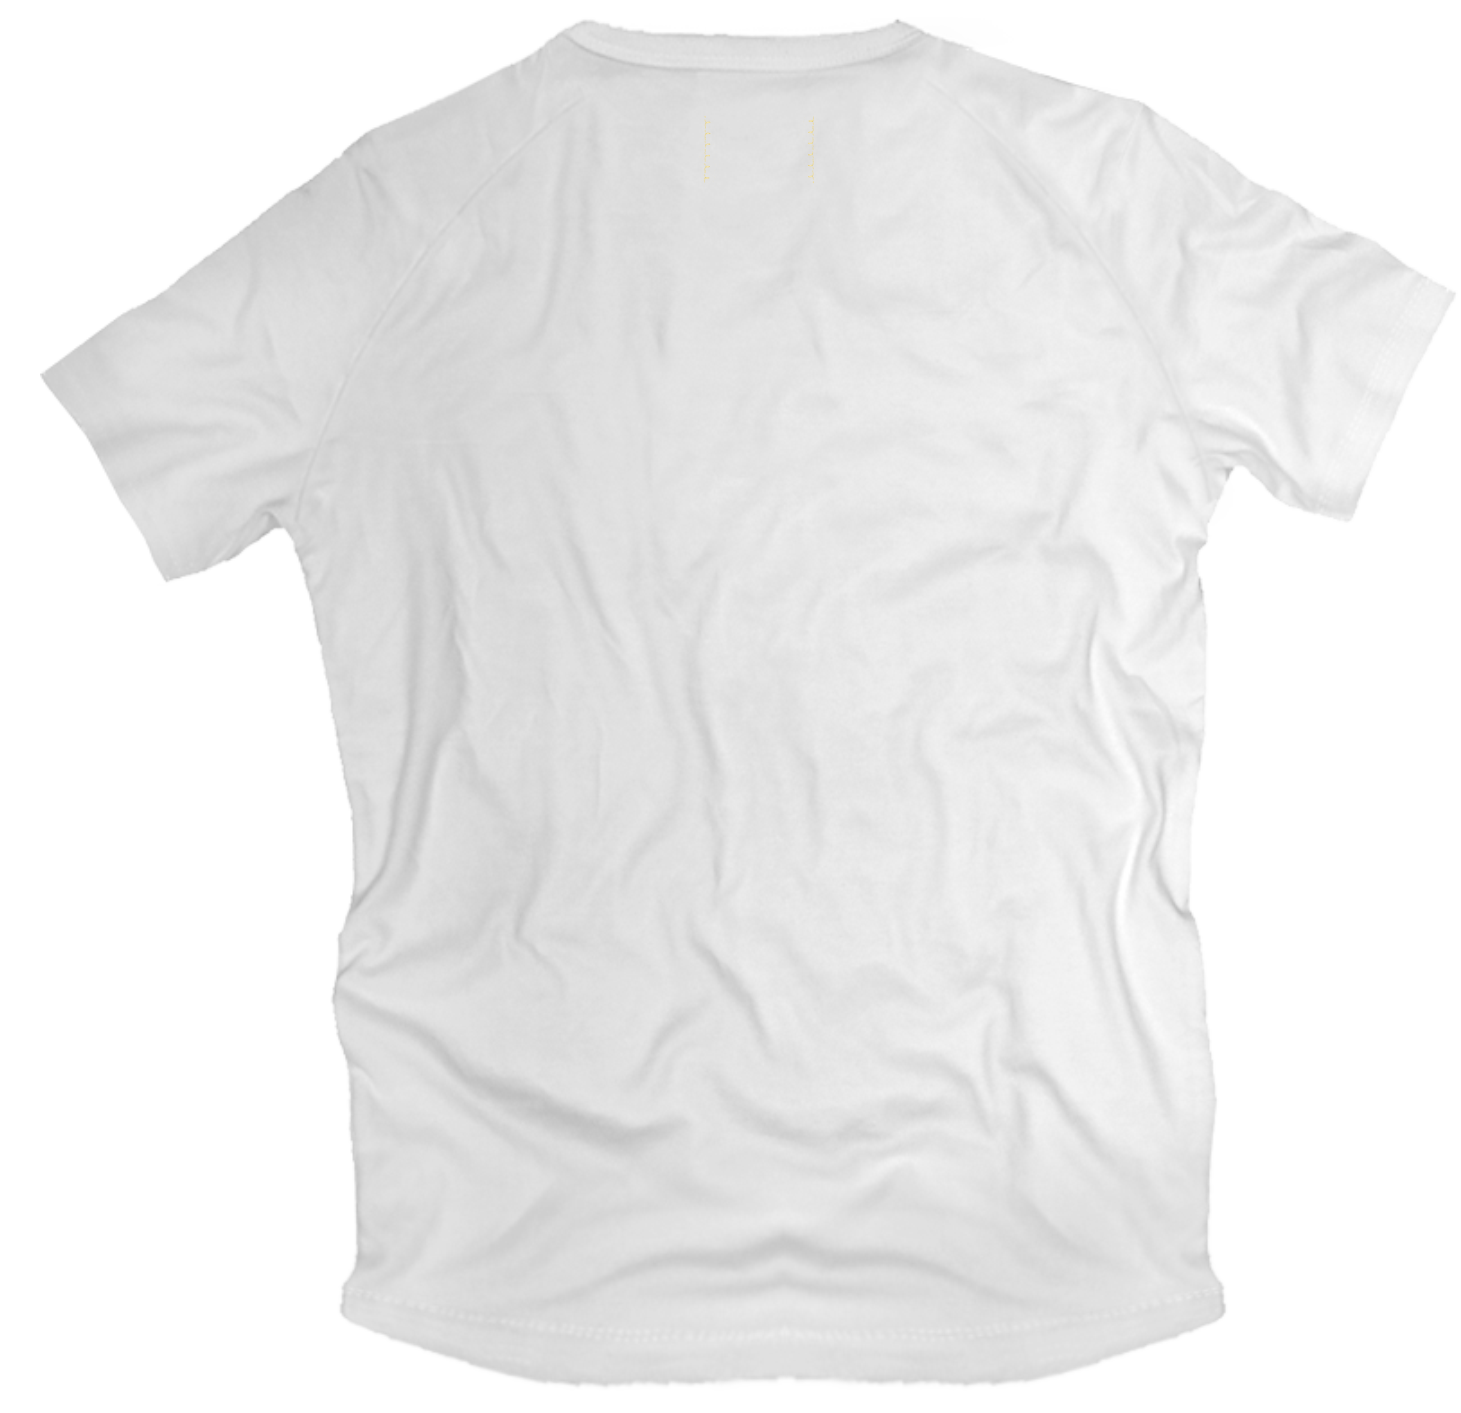 Raglan Henley Whiteout from Live Live Supply